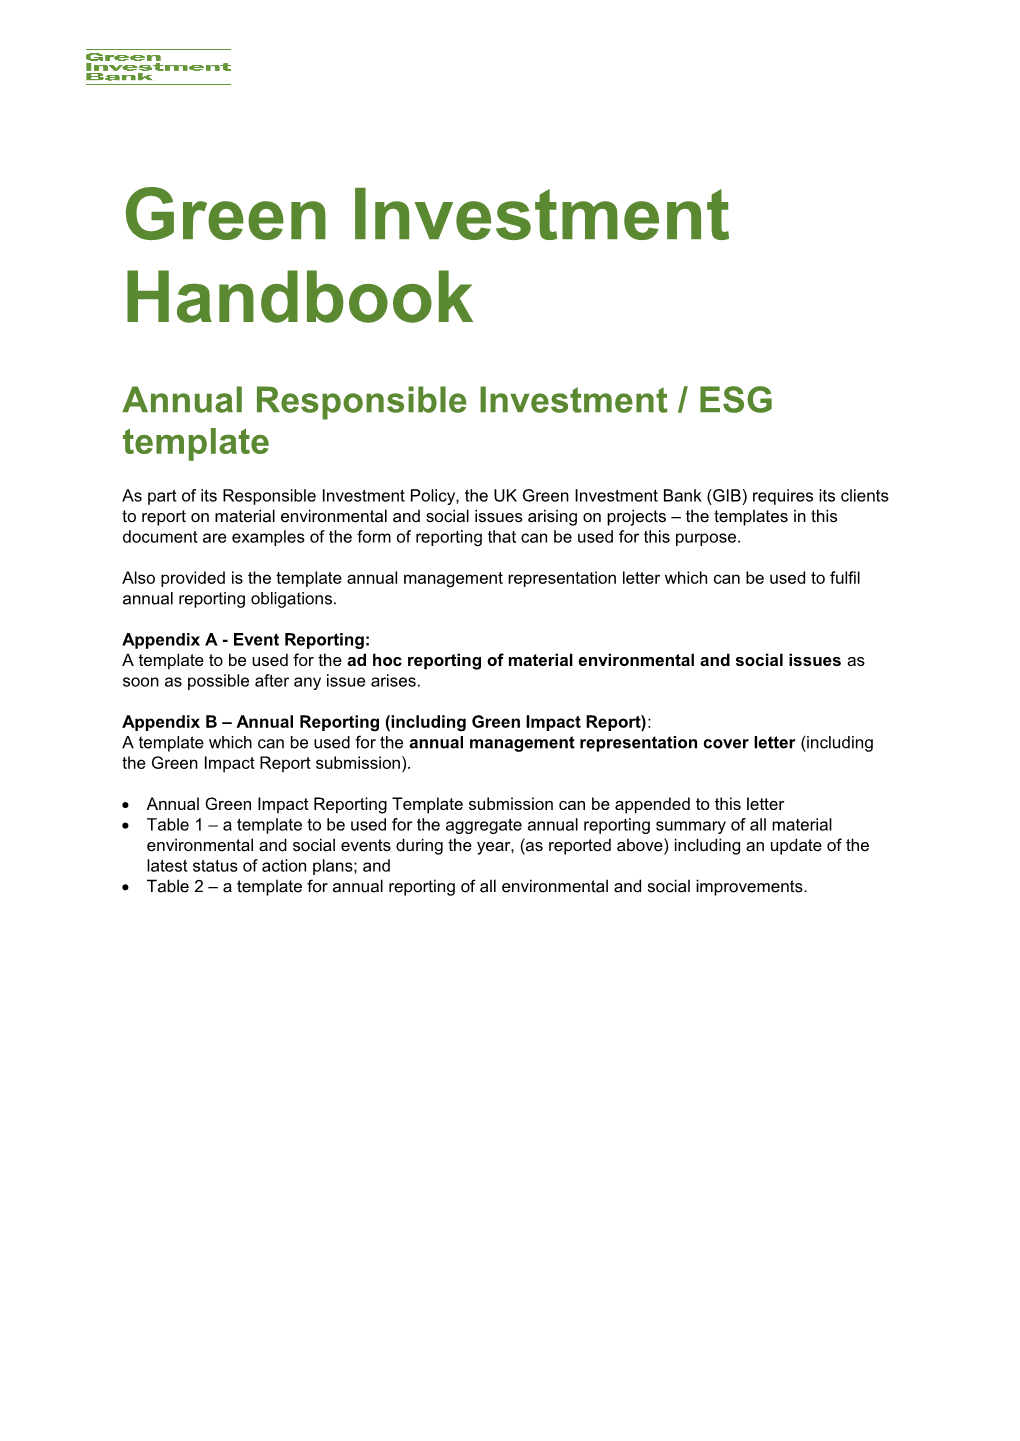 Annual Responsible Investment / ESG Template